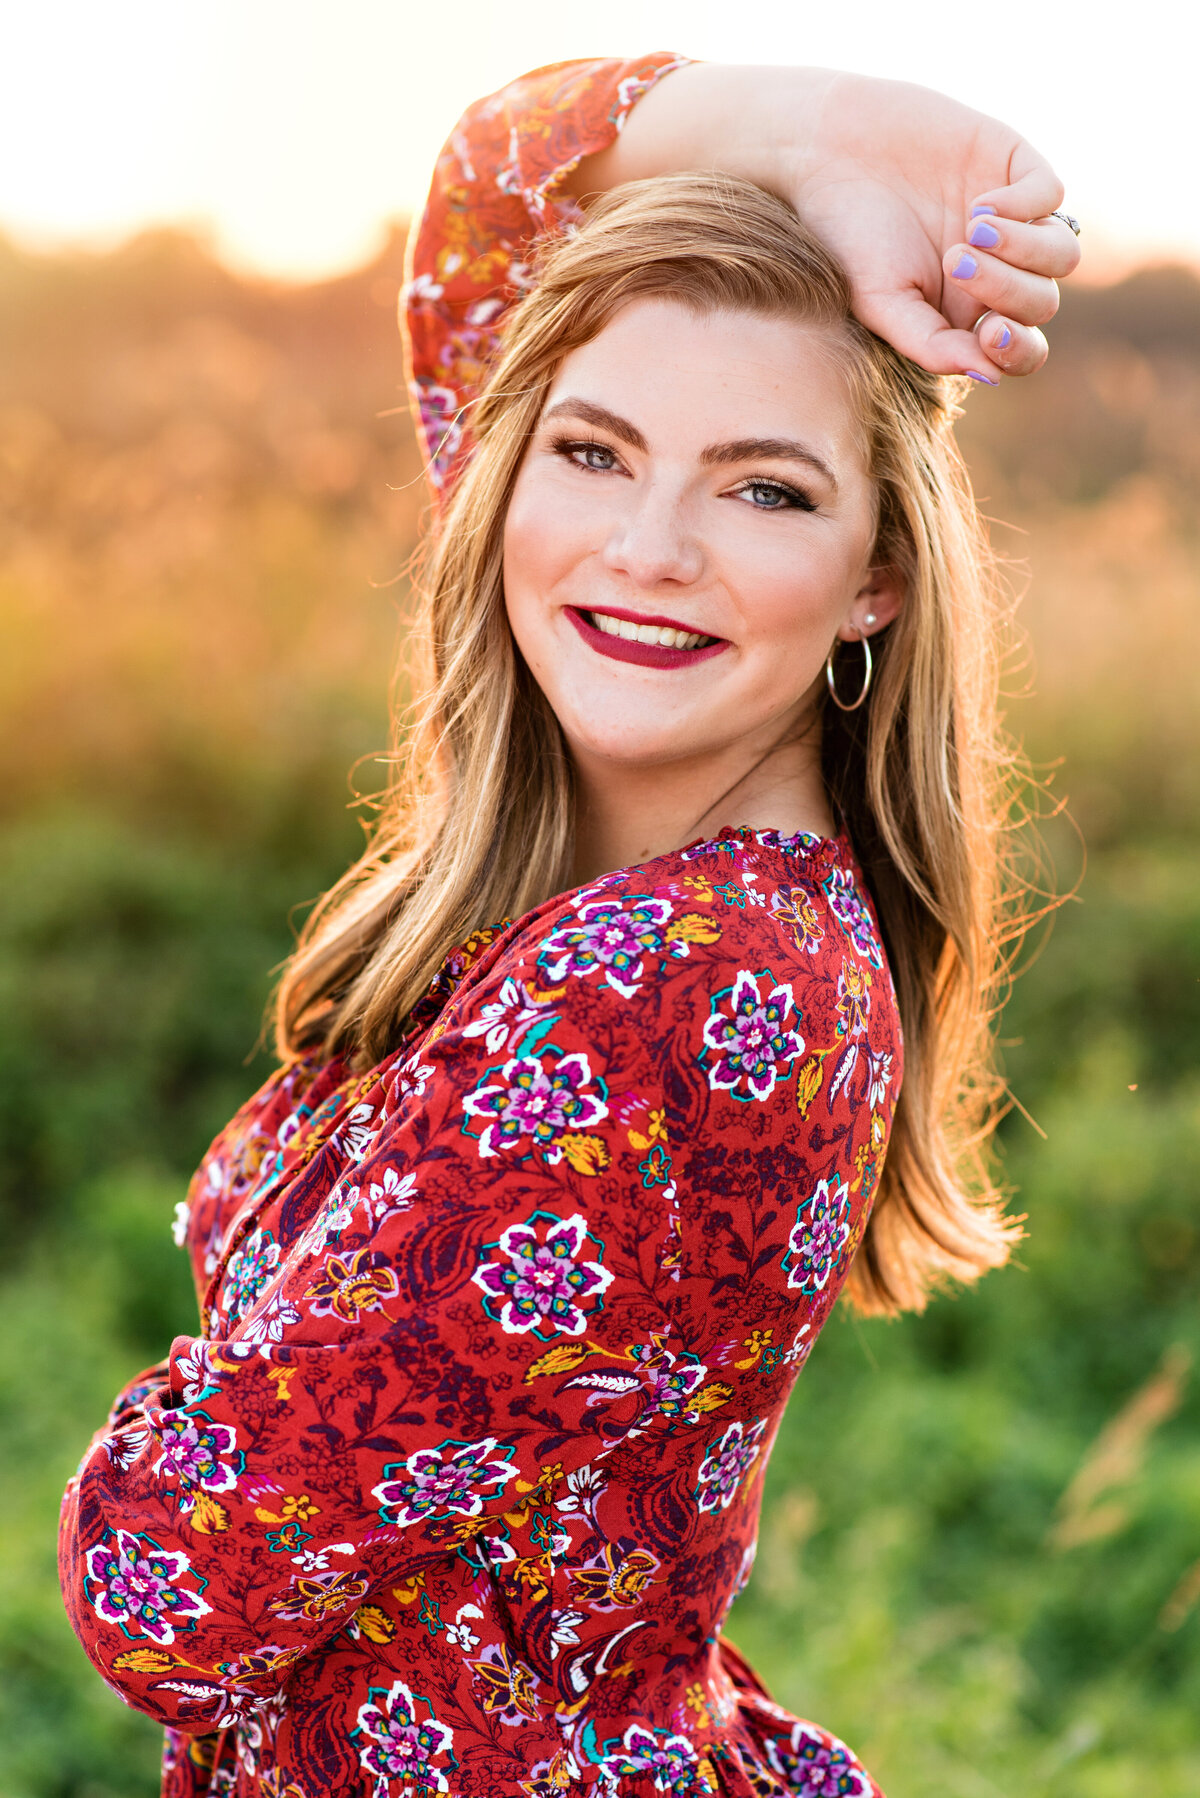 Mechanicsville high school senior girl wearing a red floral shirt poses in a field at sunset.